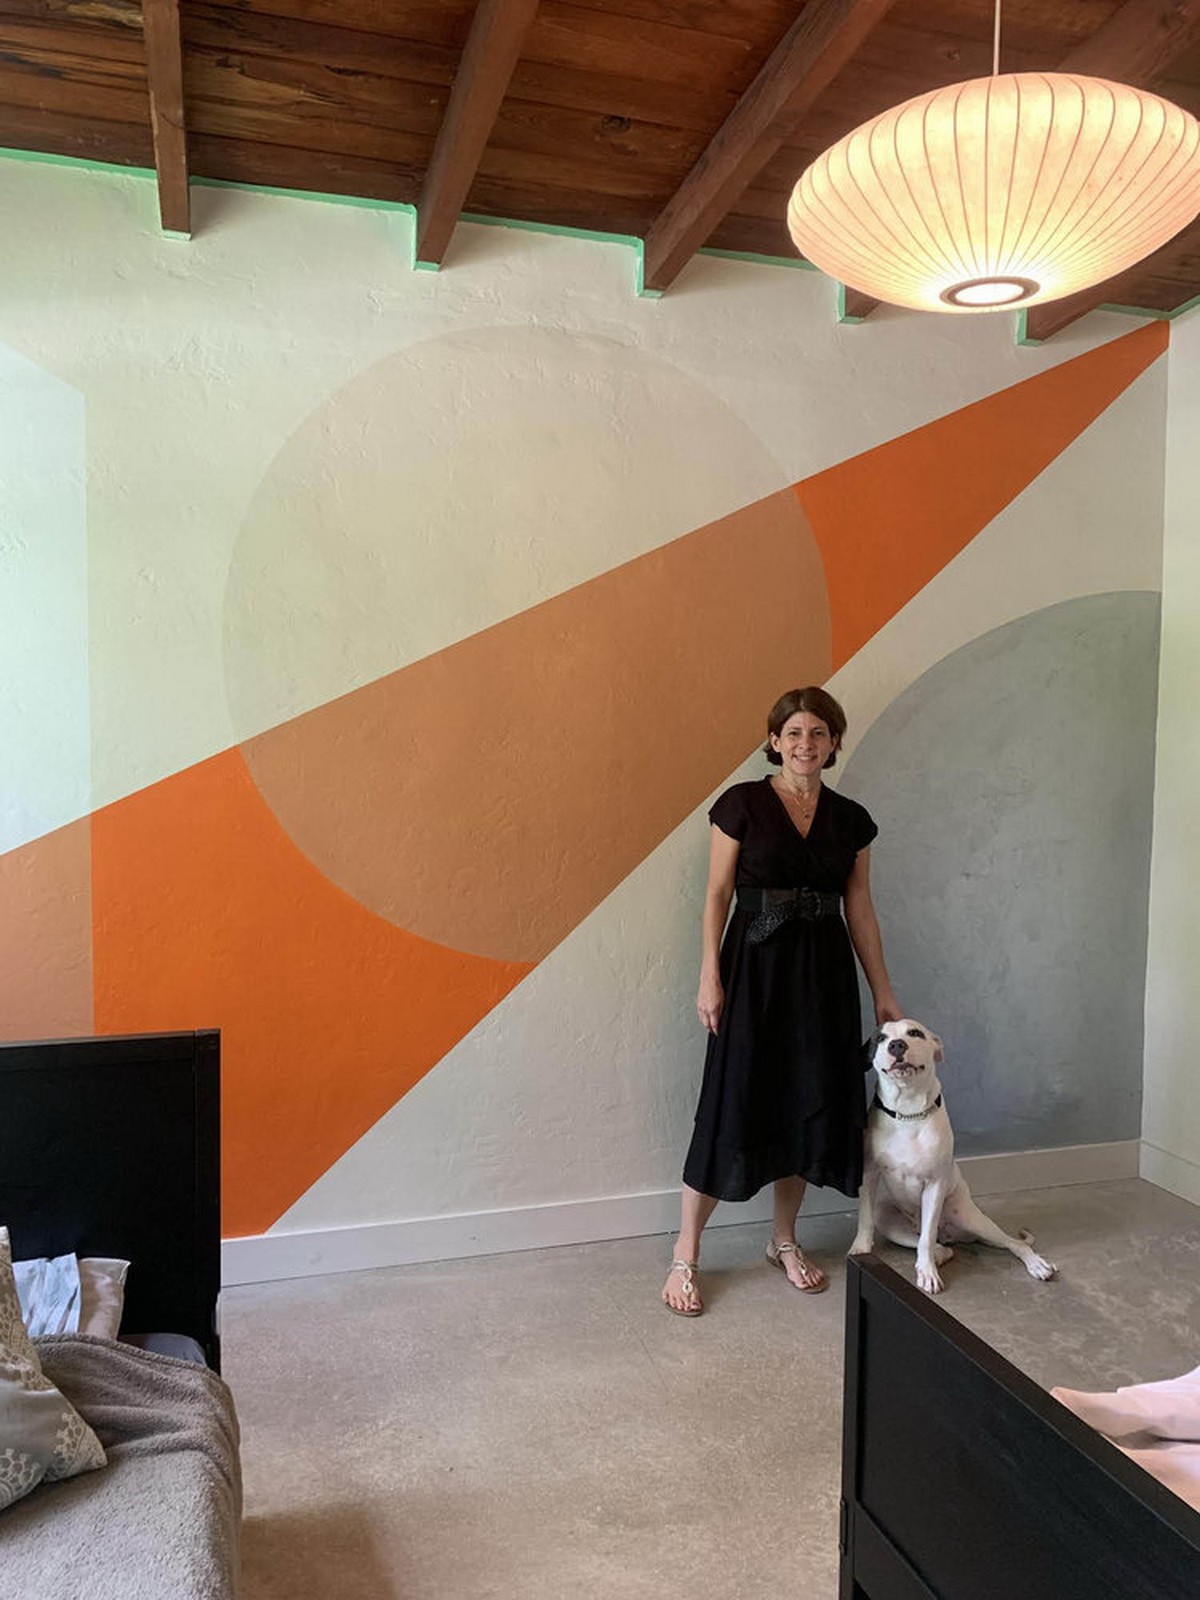 GEOMETRICA ABSTRACT VIVID COLORS MURAL IN A PENTHOUSE